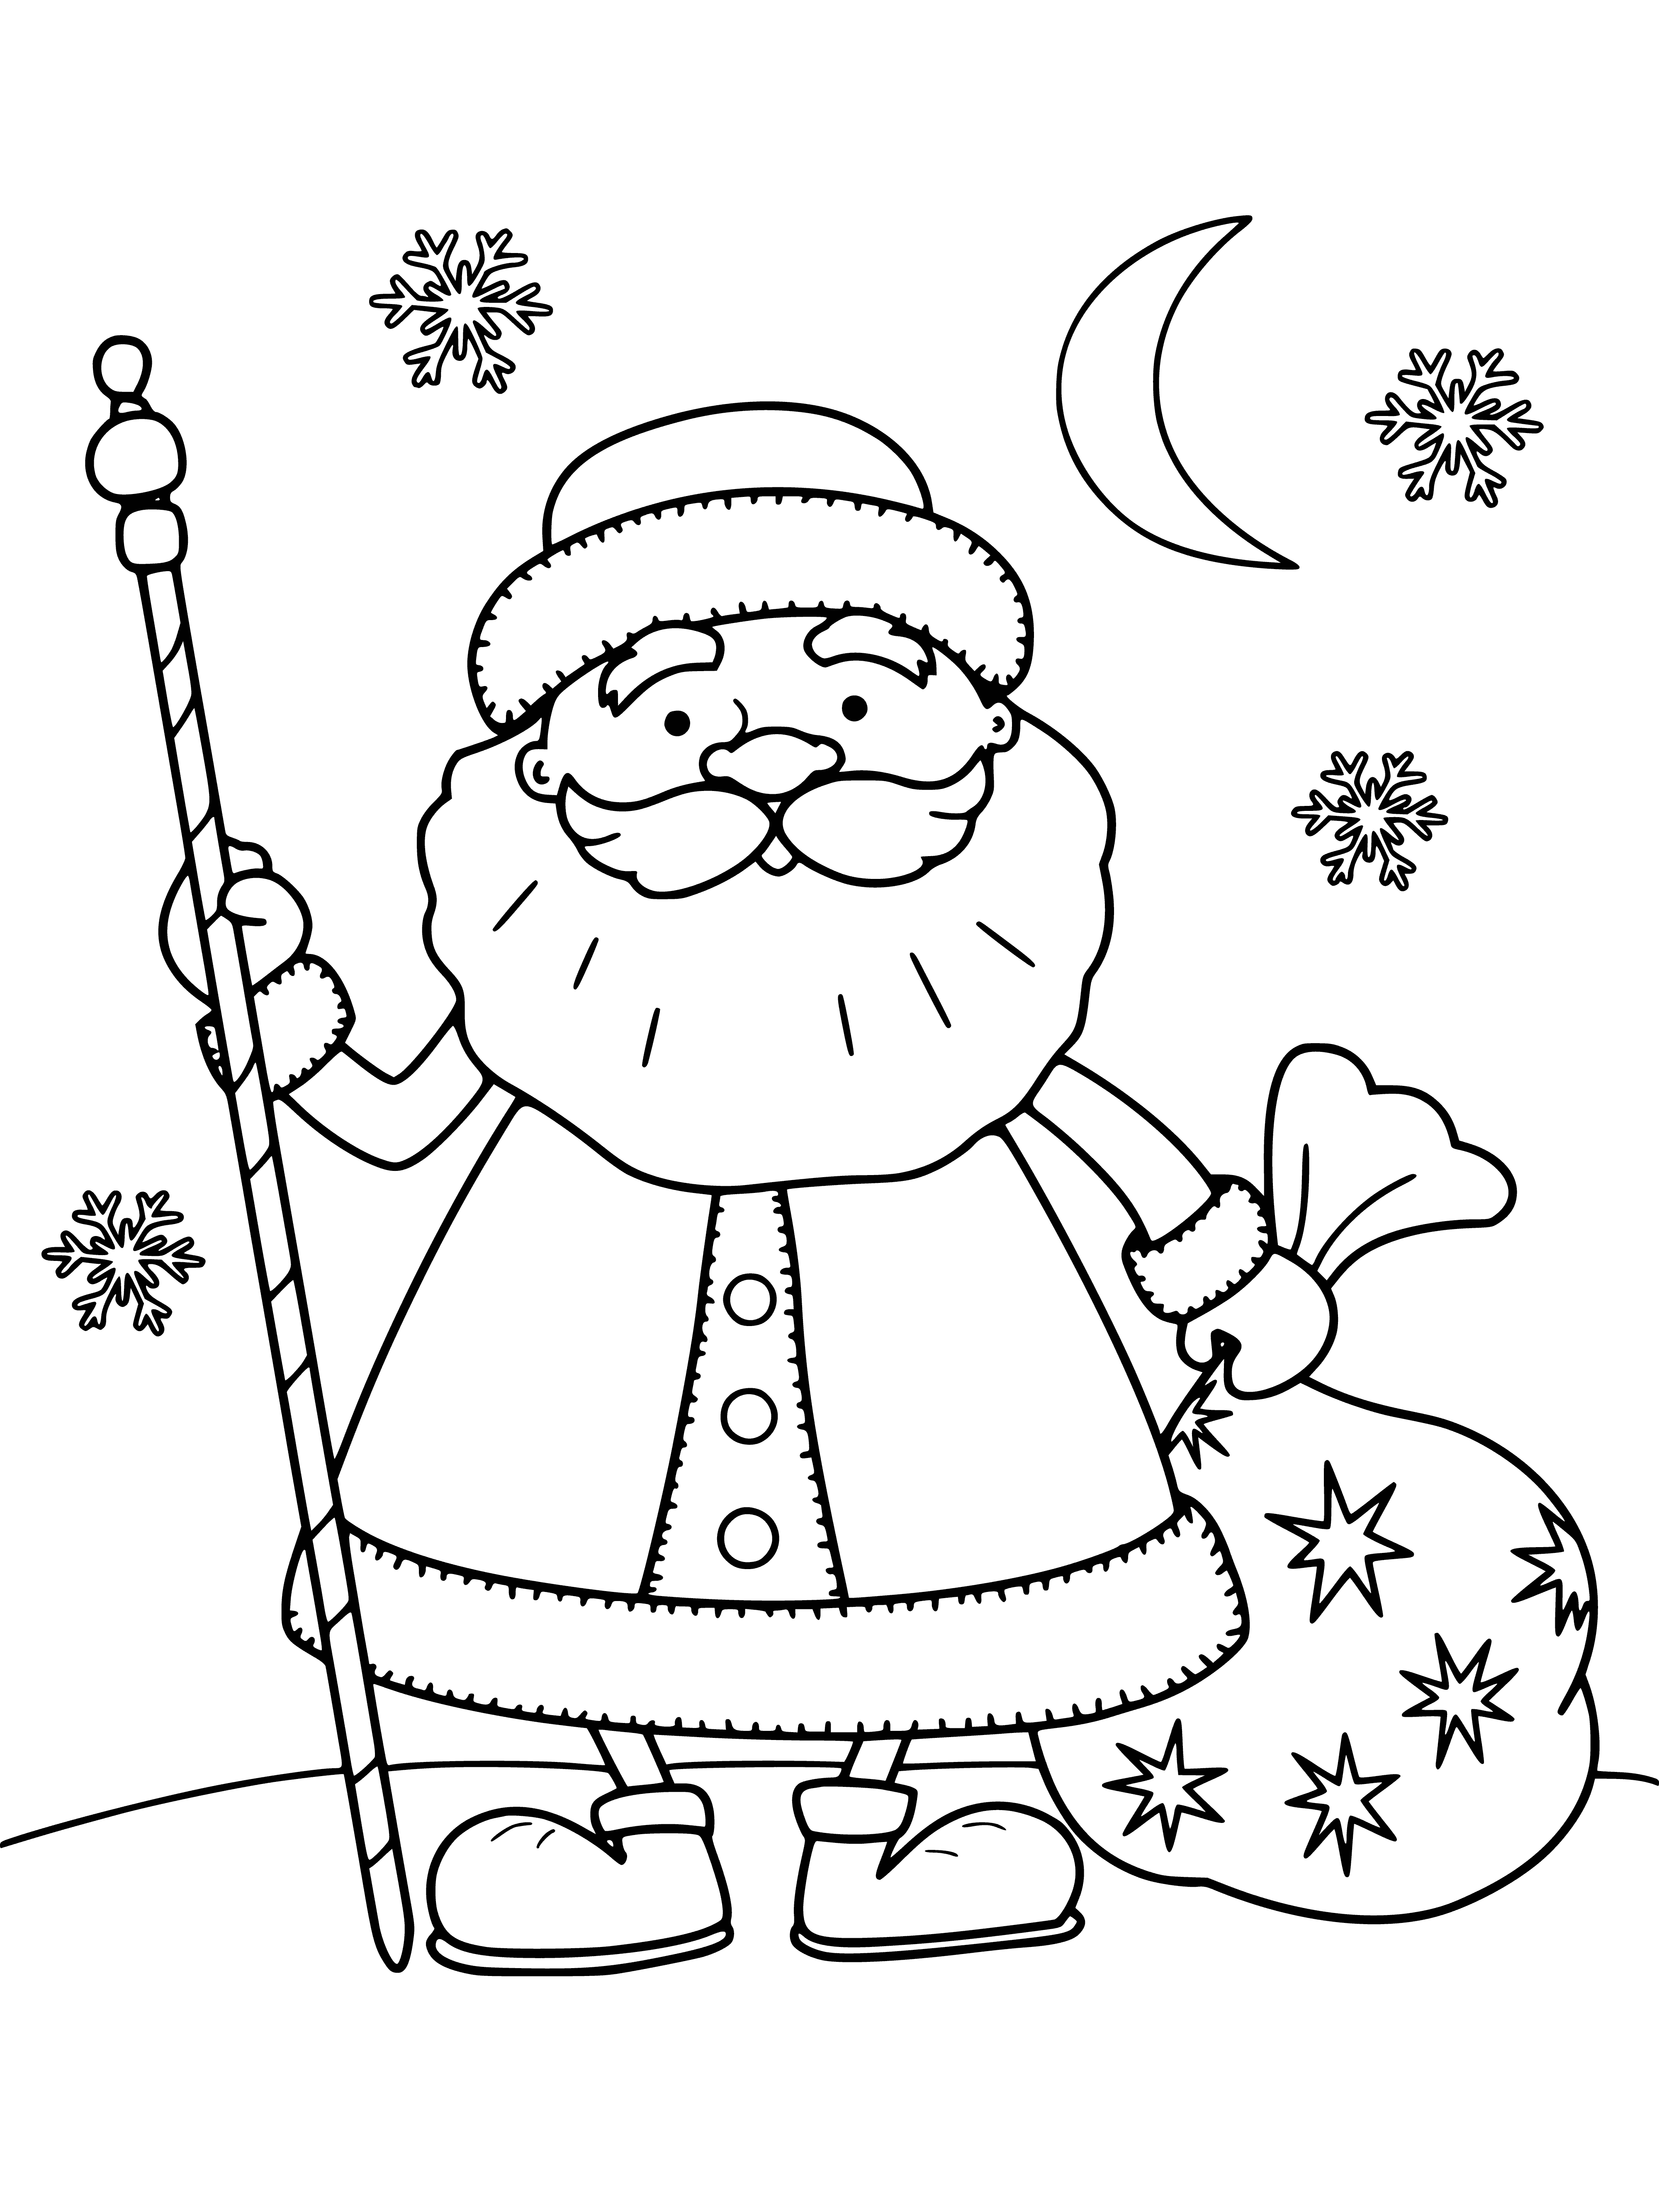 coloring page: Old man in red robes, white beard, in armchair in front of fireplace, holding bag of presents, petting small dog on lap.